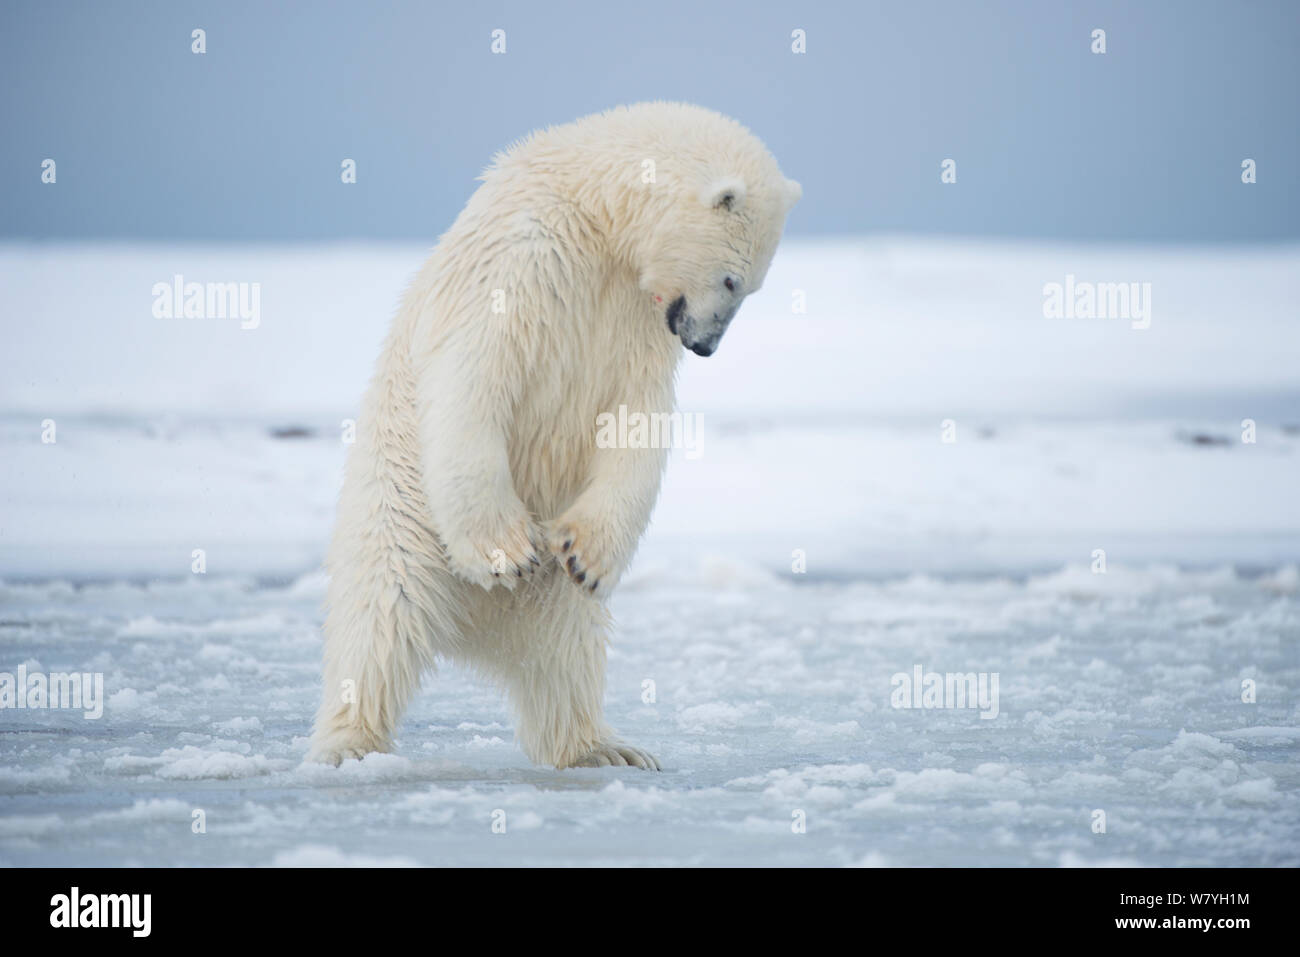 Polar bear (Ursus maritimus) young bear trying to pound a hole in the newly forming pack ice during autumn freeze up, Beaufort Sea, off Arctic coast, Alaska Stock Photo